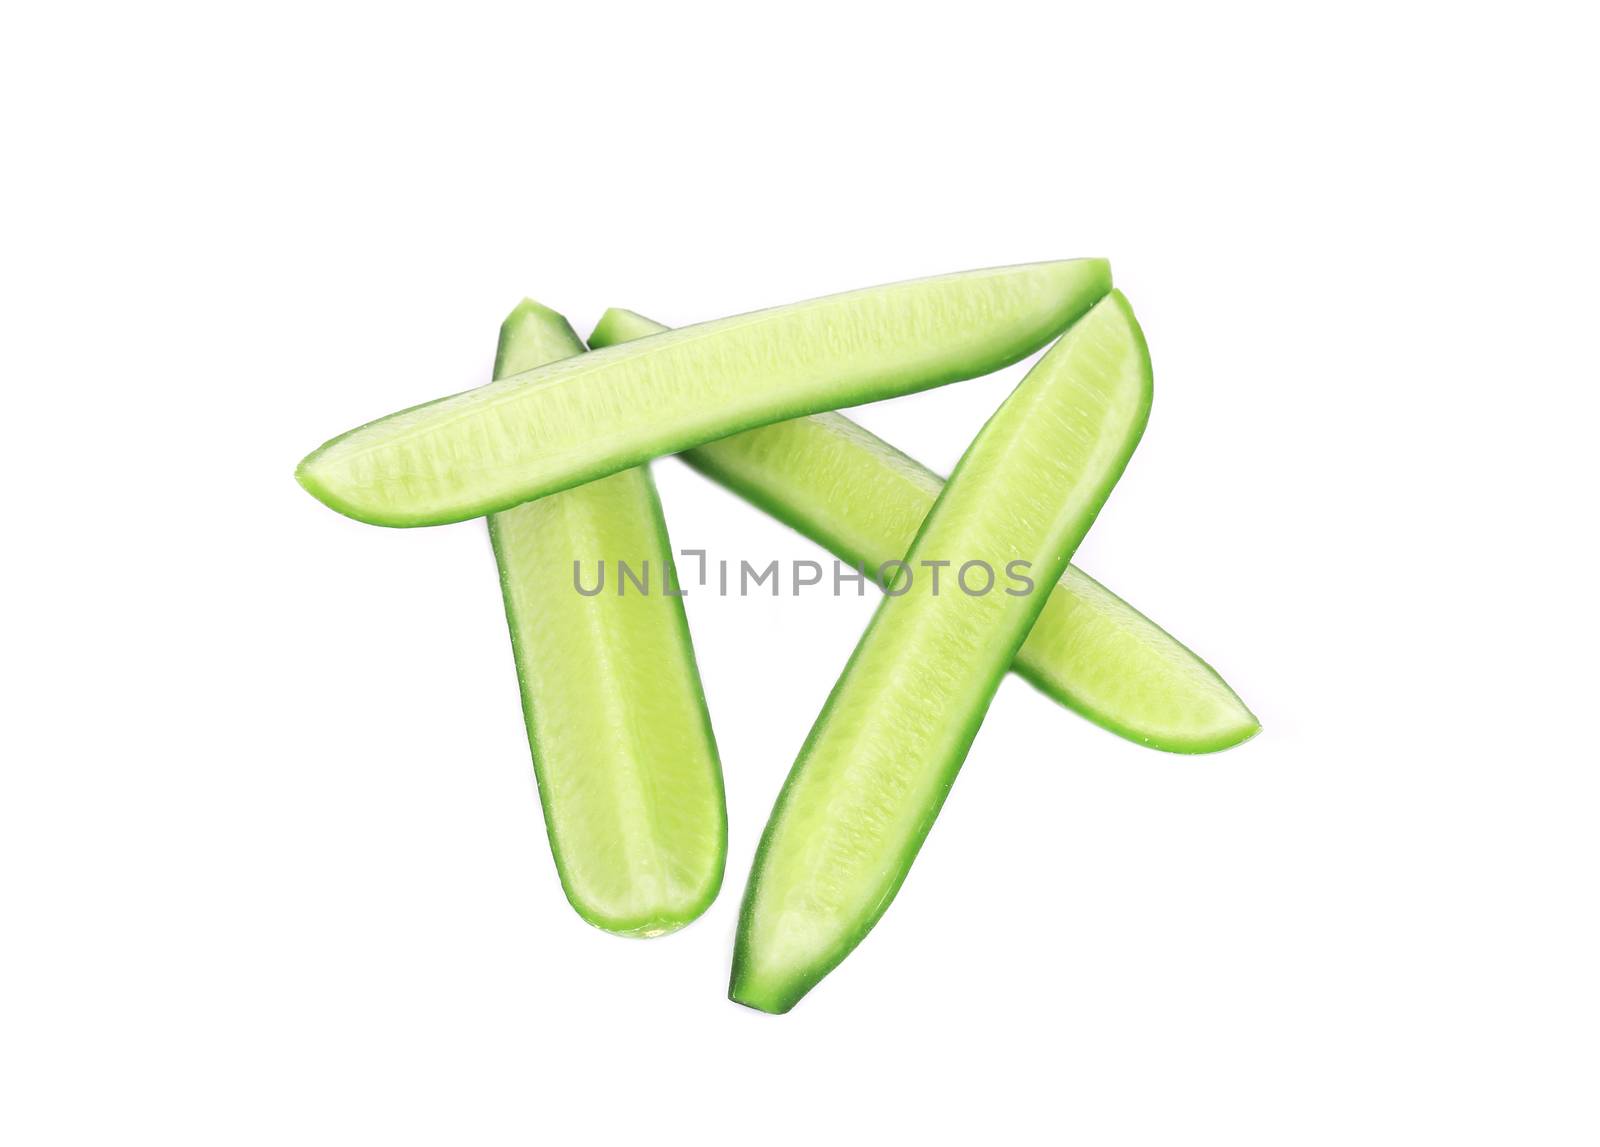 Sliced ripe cucumber. Isolated on a white background.